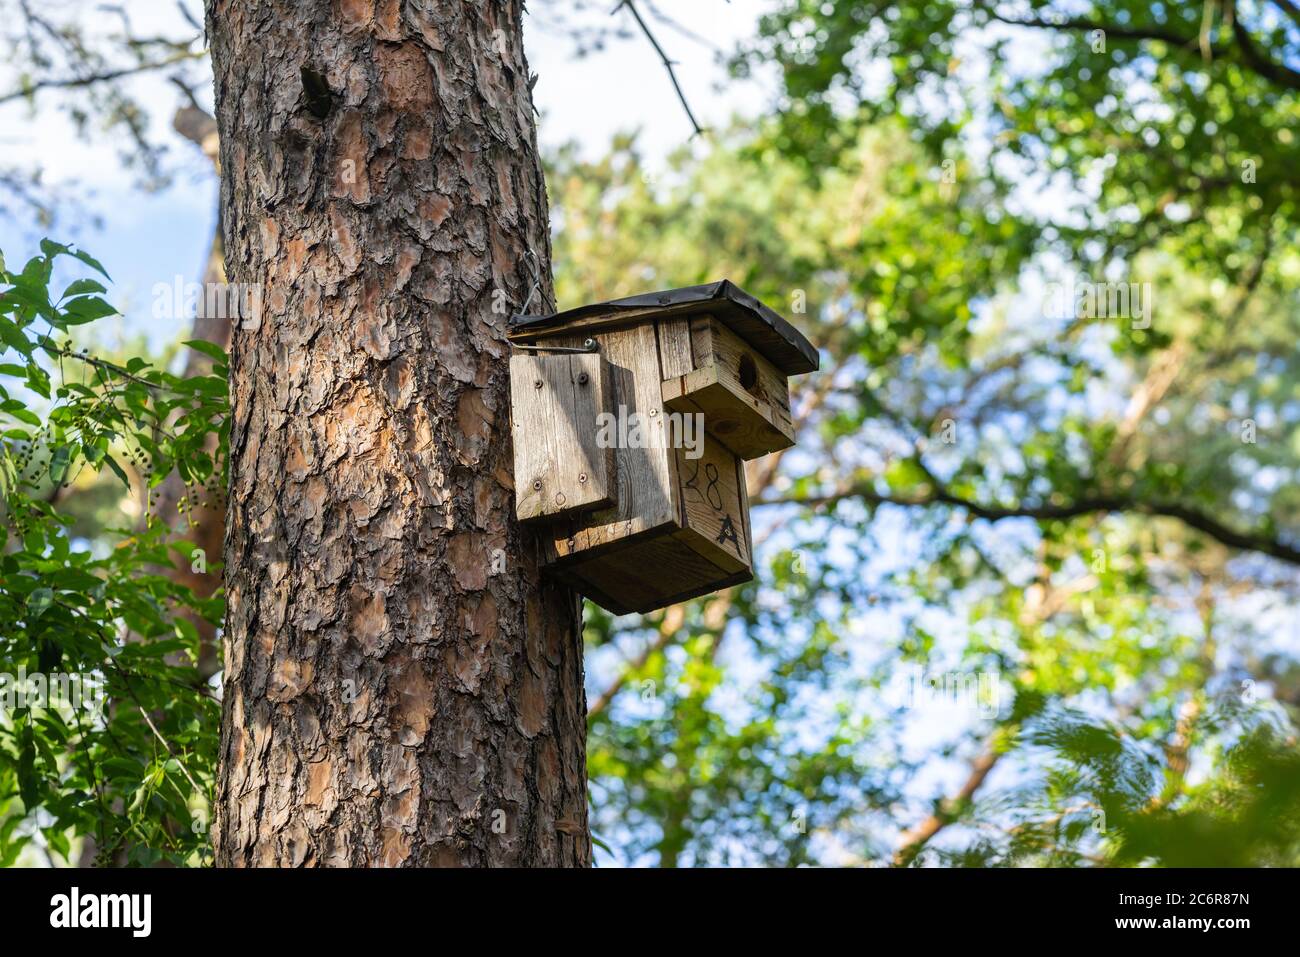 A wooden bird nesting box mounted to a conifer tree in the small woodland Koenigsheide in Berlin to encourage birds to the area, Germany, Europe Stock Photo